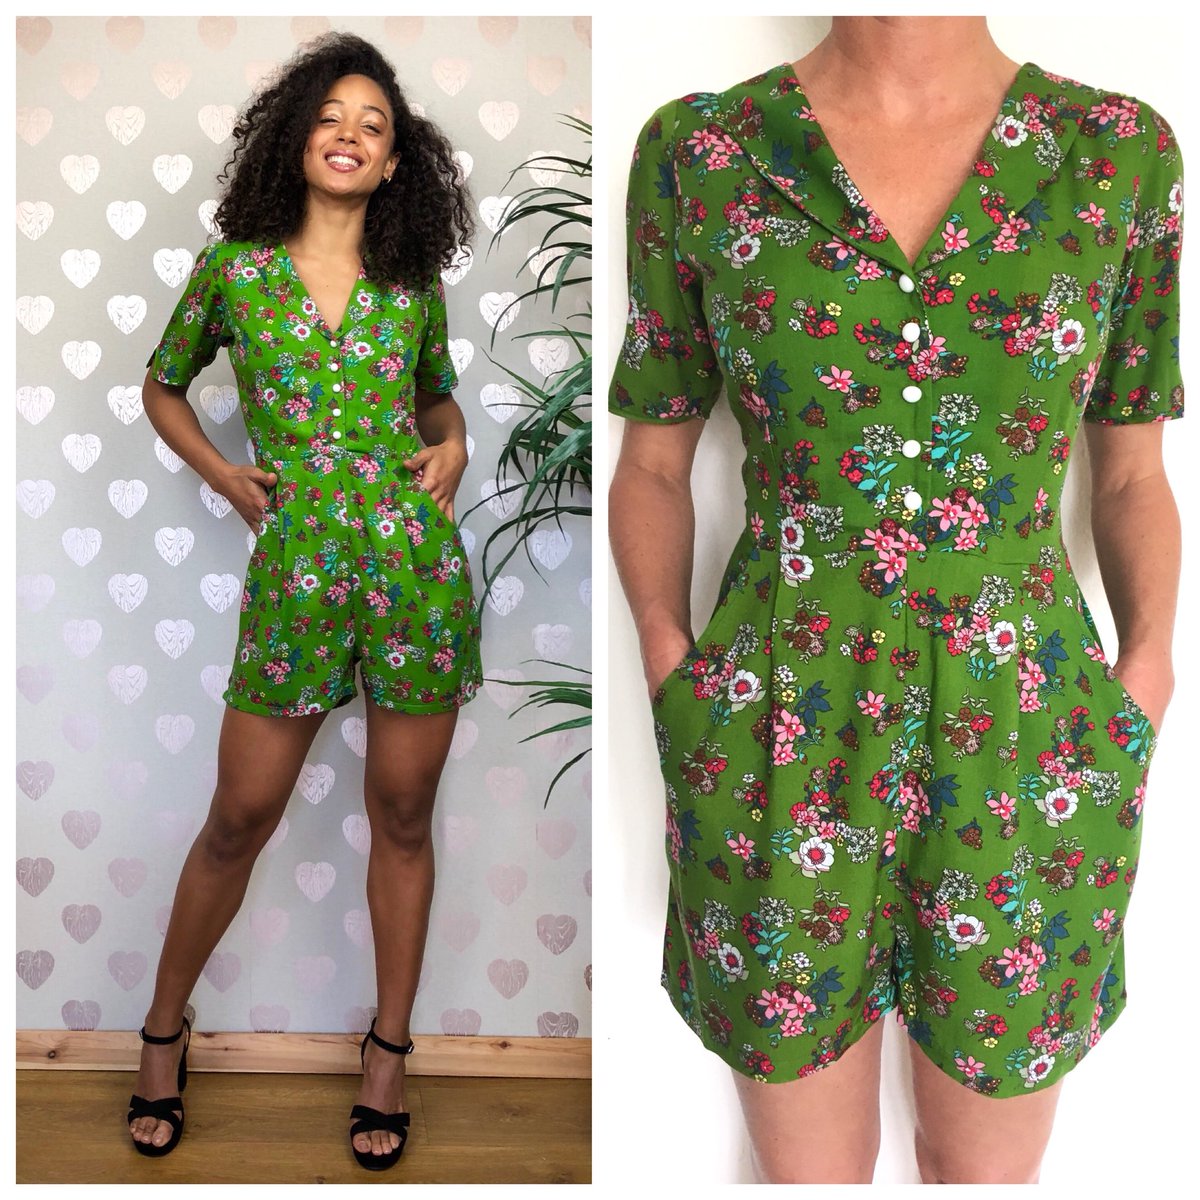 Newness #green #greenclothes #floral #potd #floralplaysuit #playsuits #floralclothing #playsuitoftheday #womenswear #womensclothes #womensfashion #fashion #fashionista #fashionable #fashionboutique #boutiquefashion #fashionblog #fourtiesfashion #vintagestyle #vintageinspired